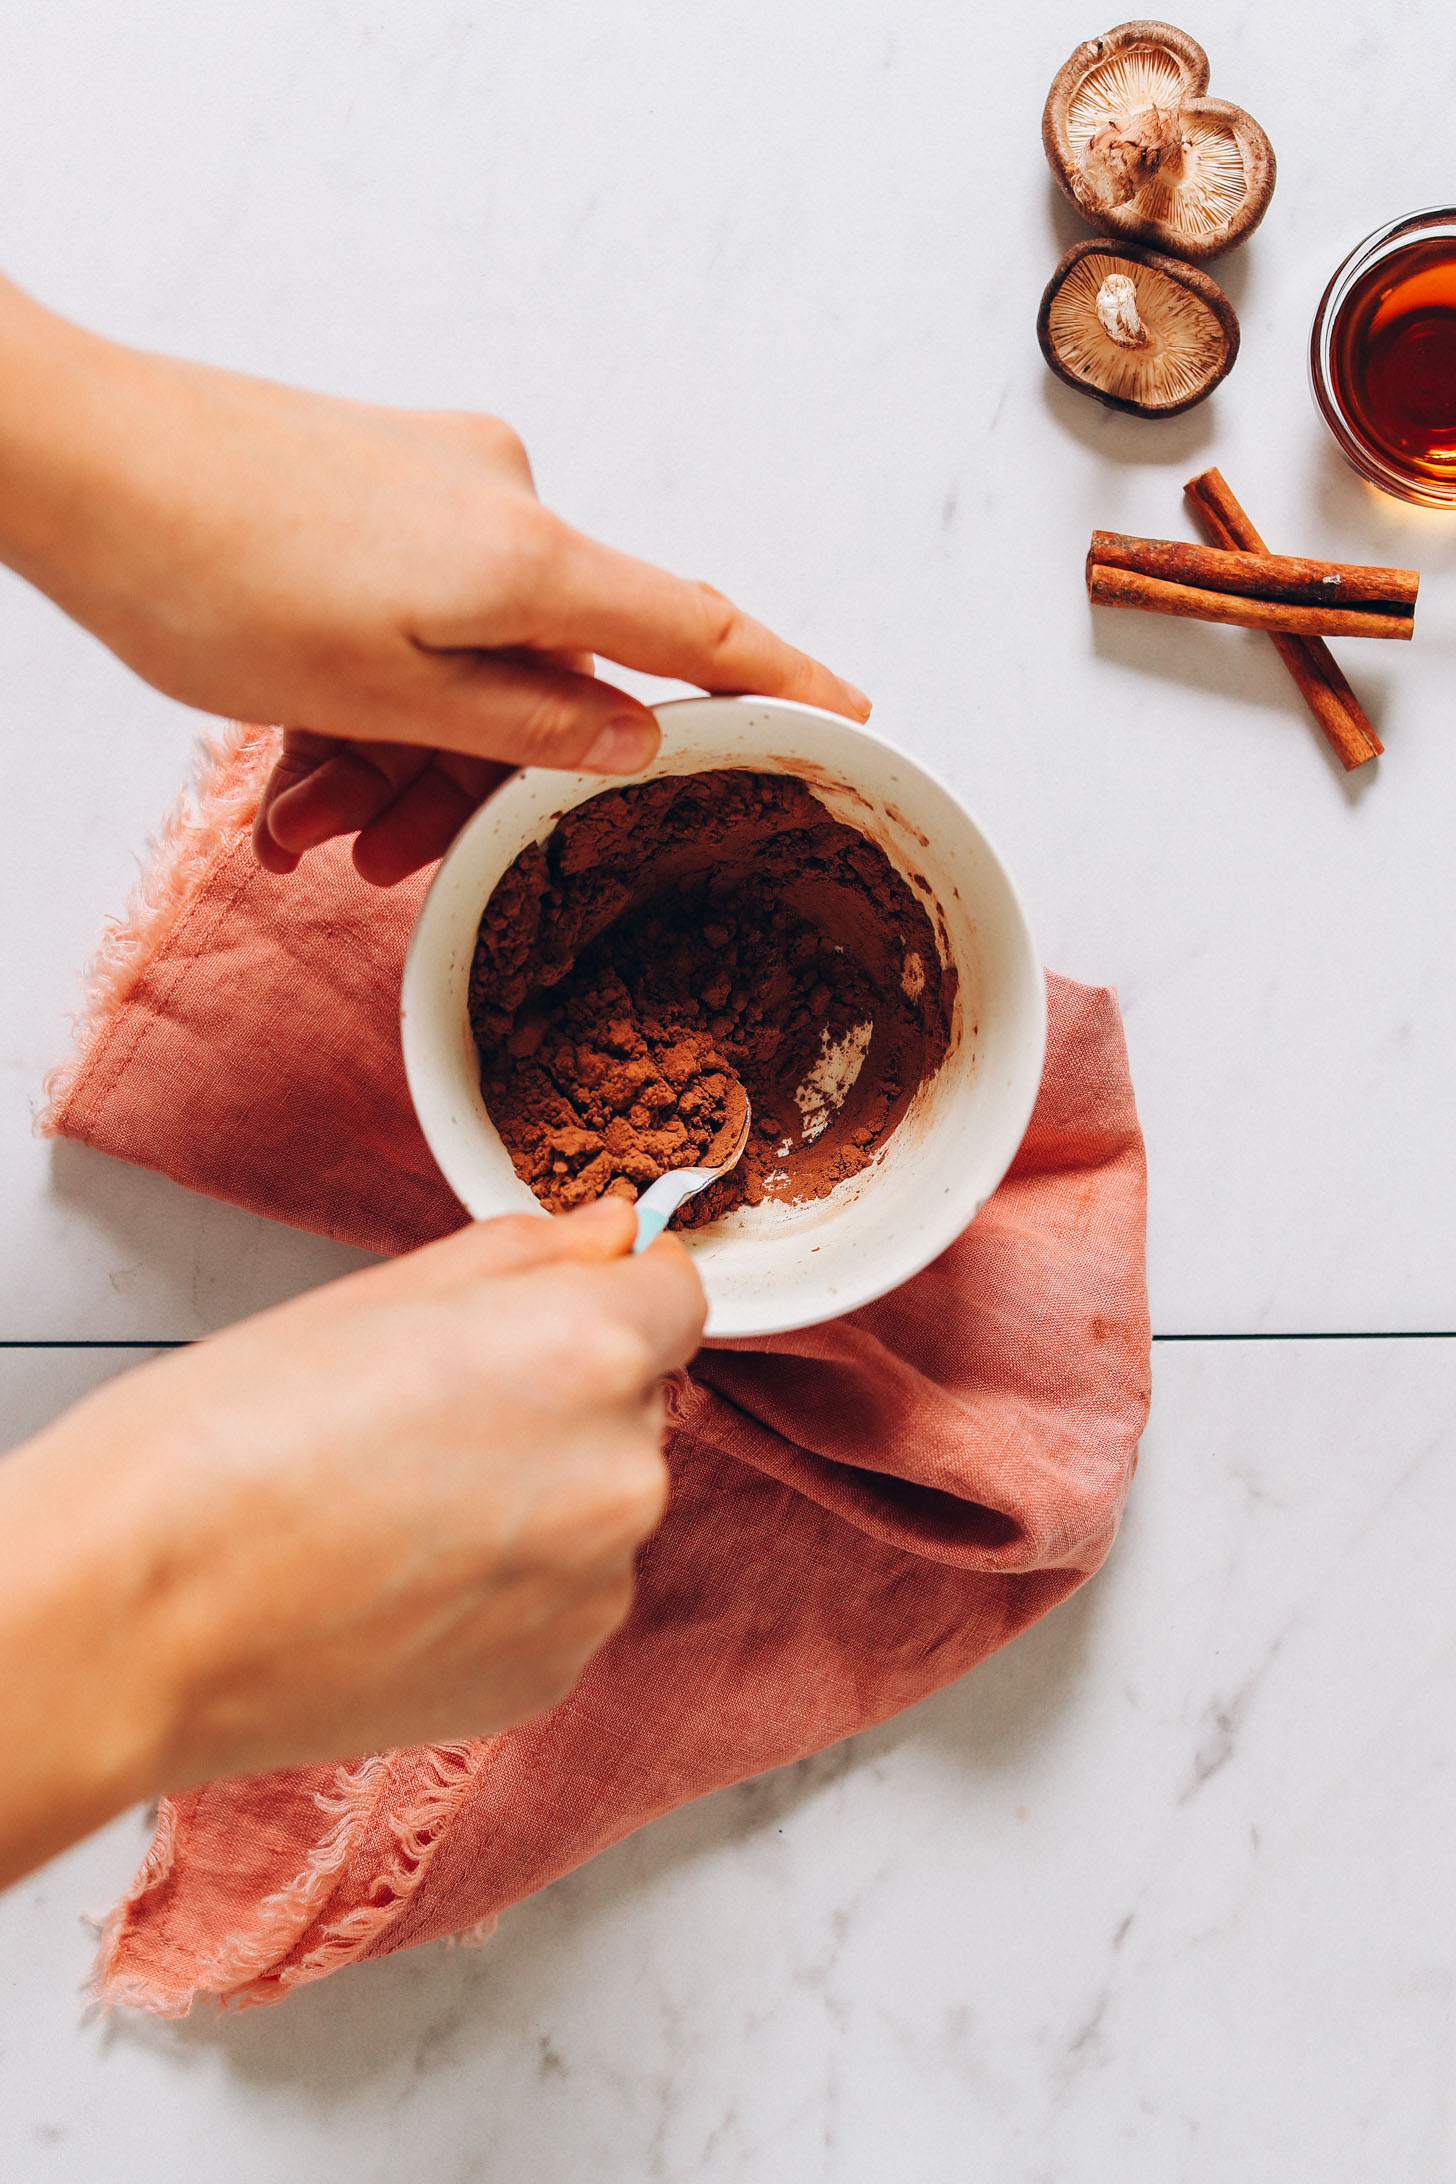 Overhead image of white bowl on a pink towel and a hand stirring cacao powder